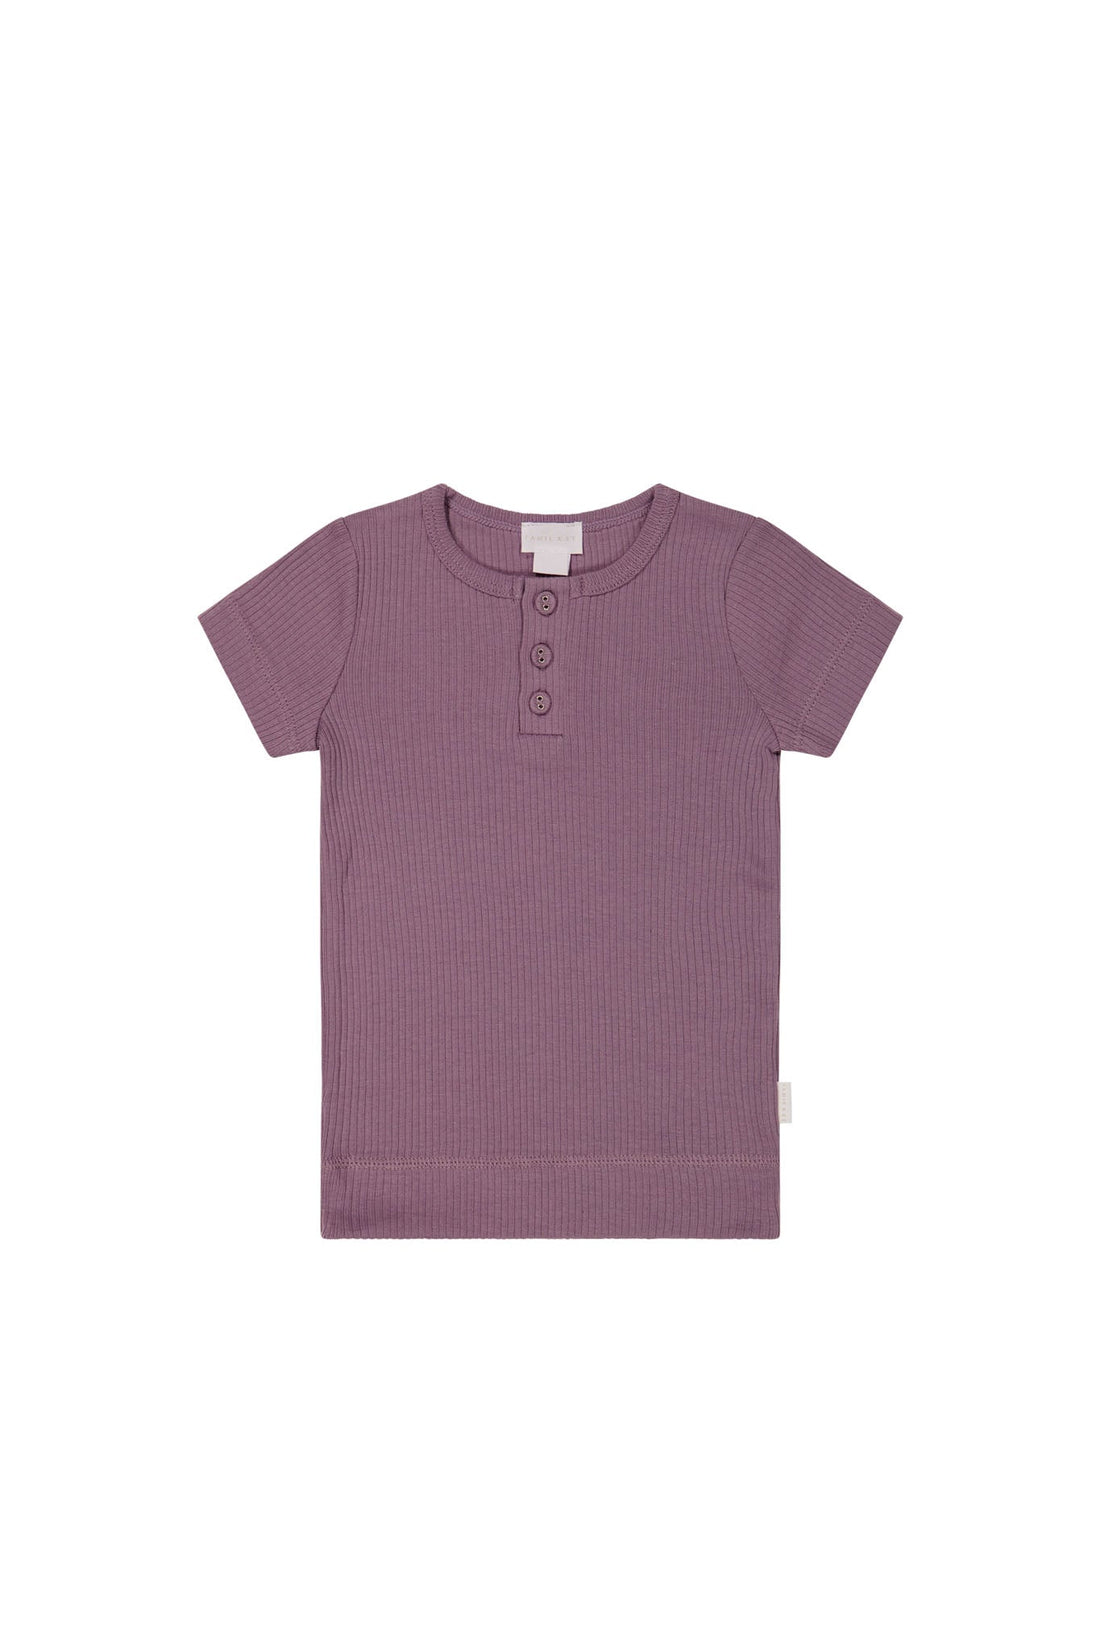 Organic Cotton Modal Henley Tee - Della Childrens Top from Jamie Kay USA